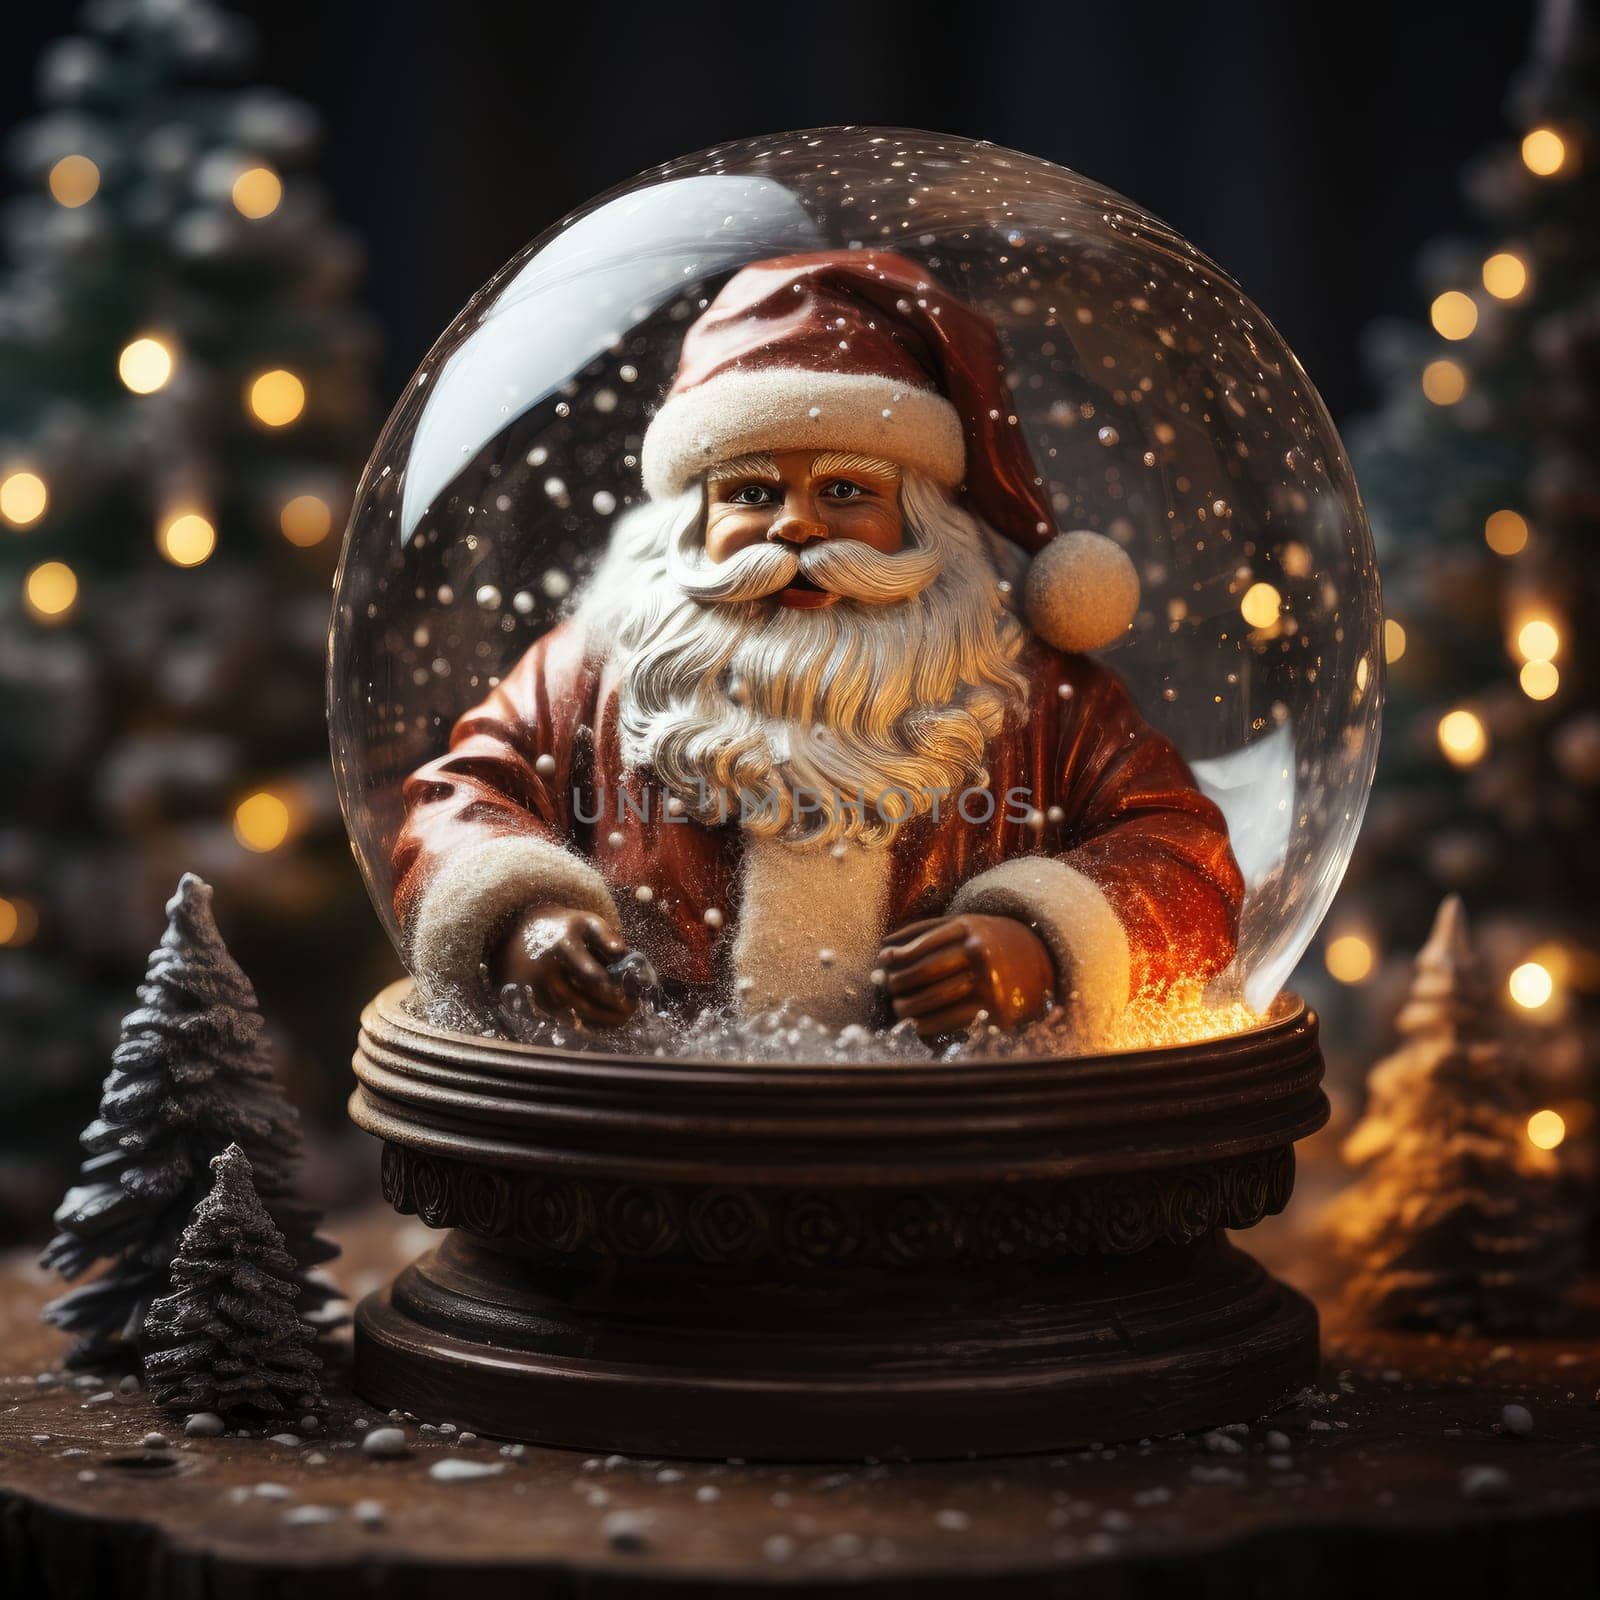 Santa Claus in Festive Christmas Snow Globe Gift Decoration by Yurich32